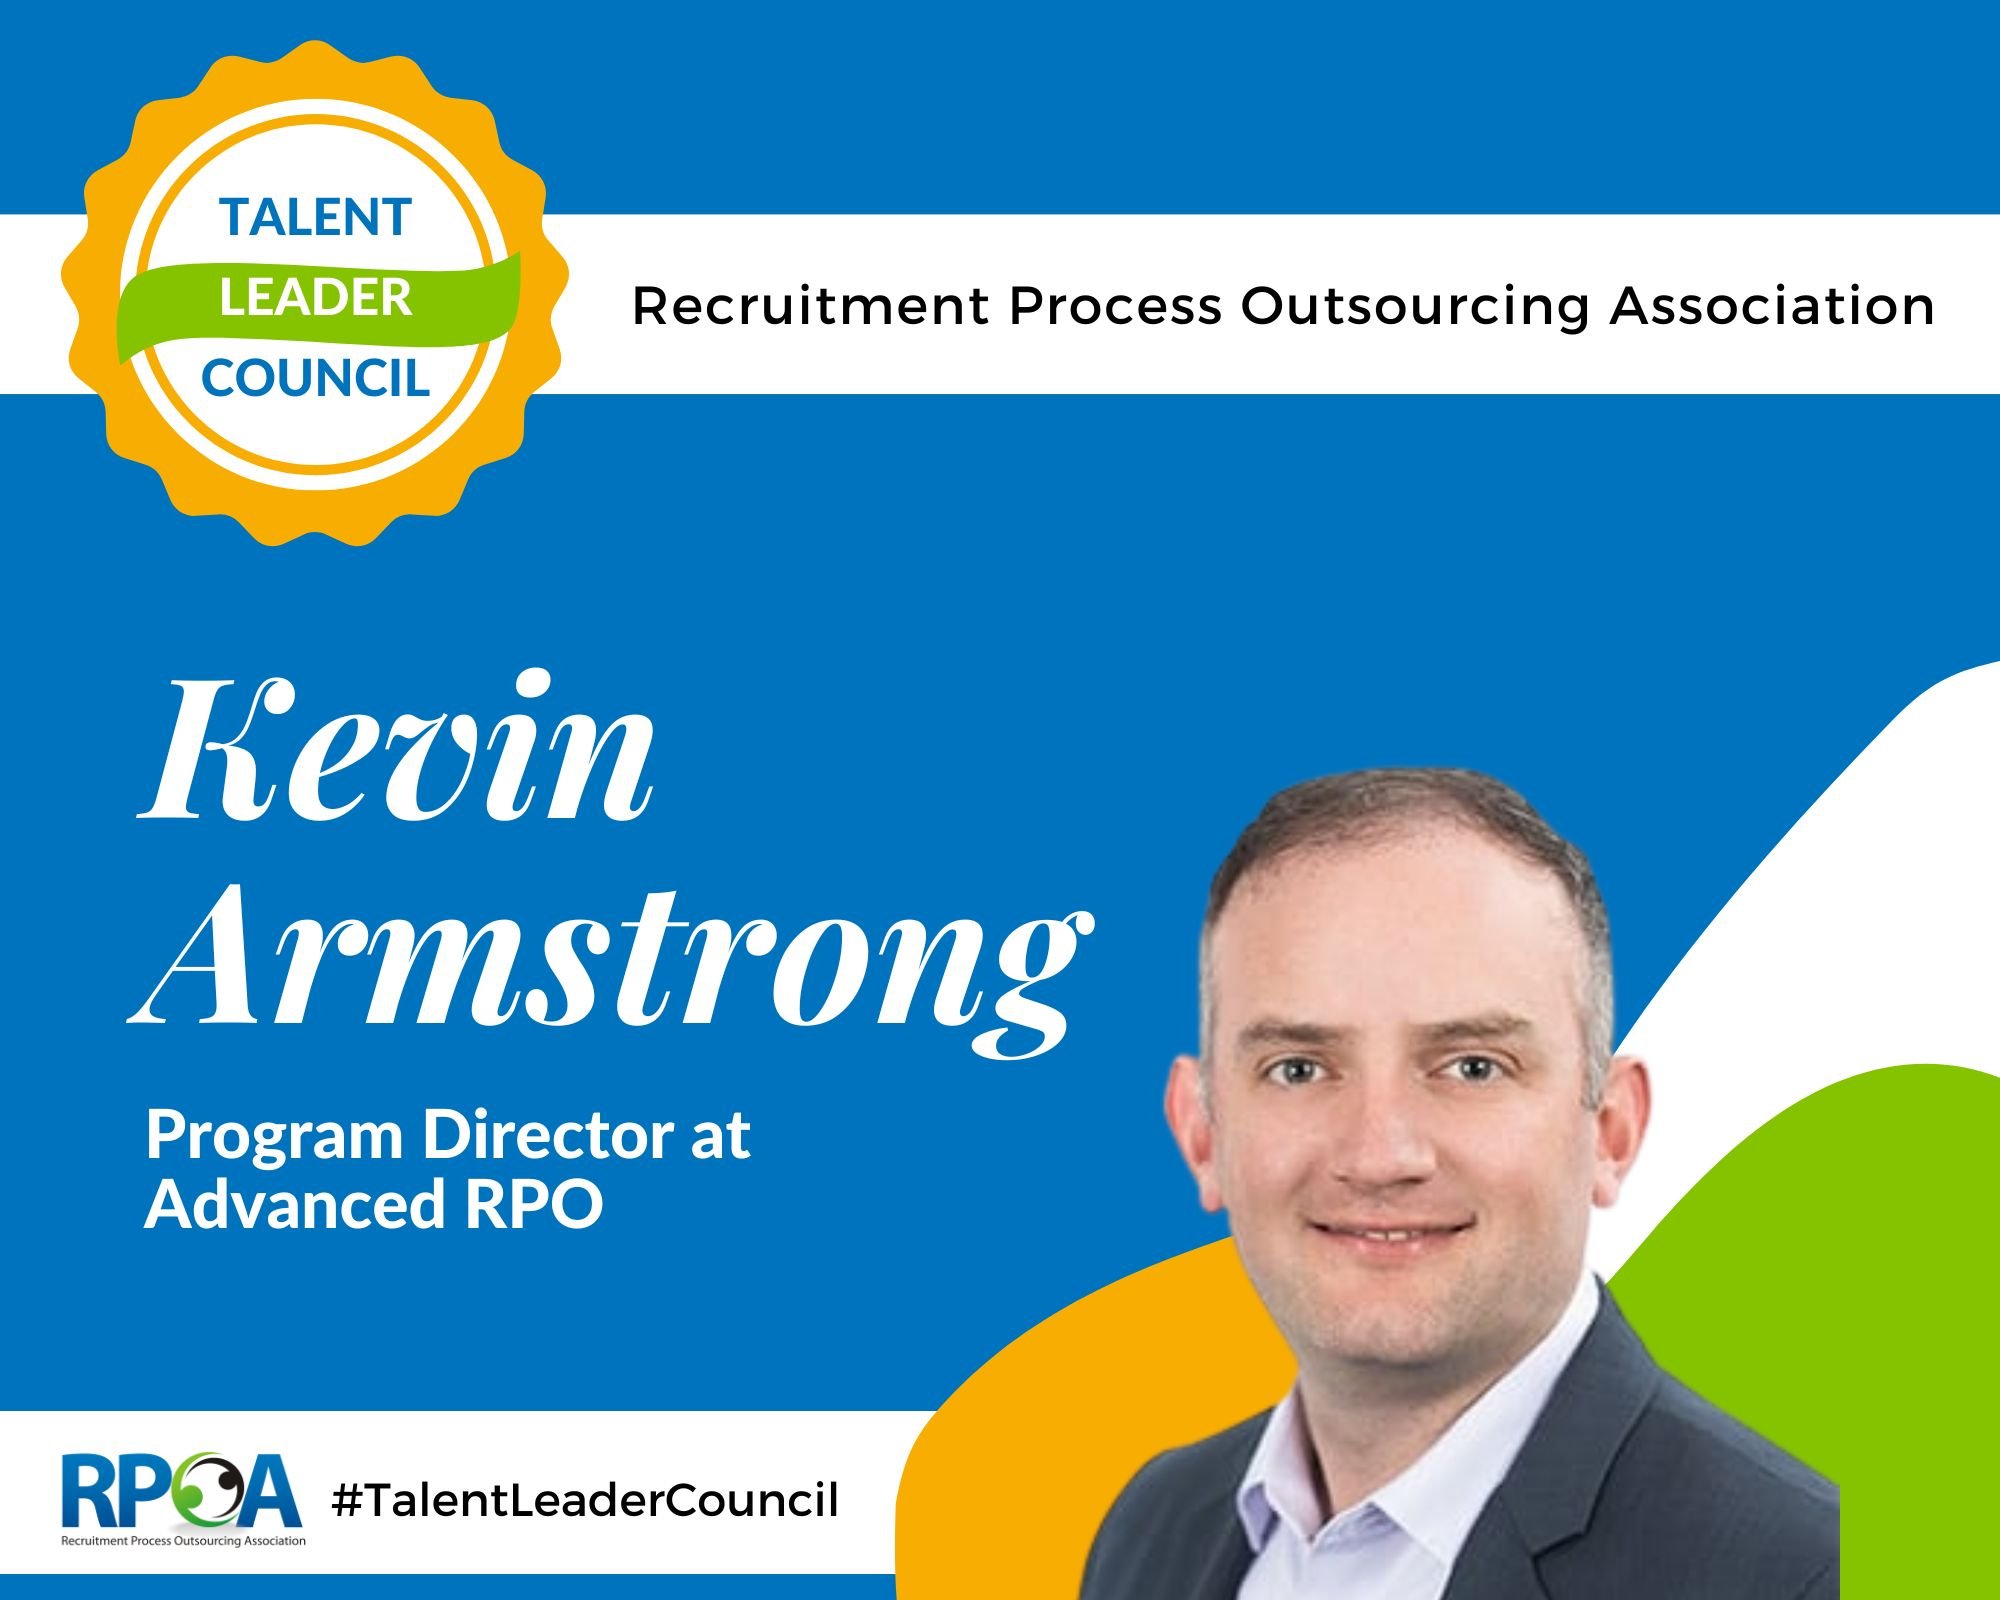 Kevin Armstrong On Recruitment Technology and Labor Market Analysis Trends